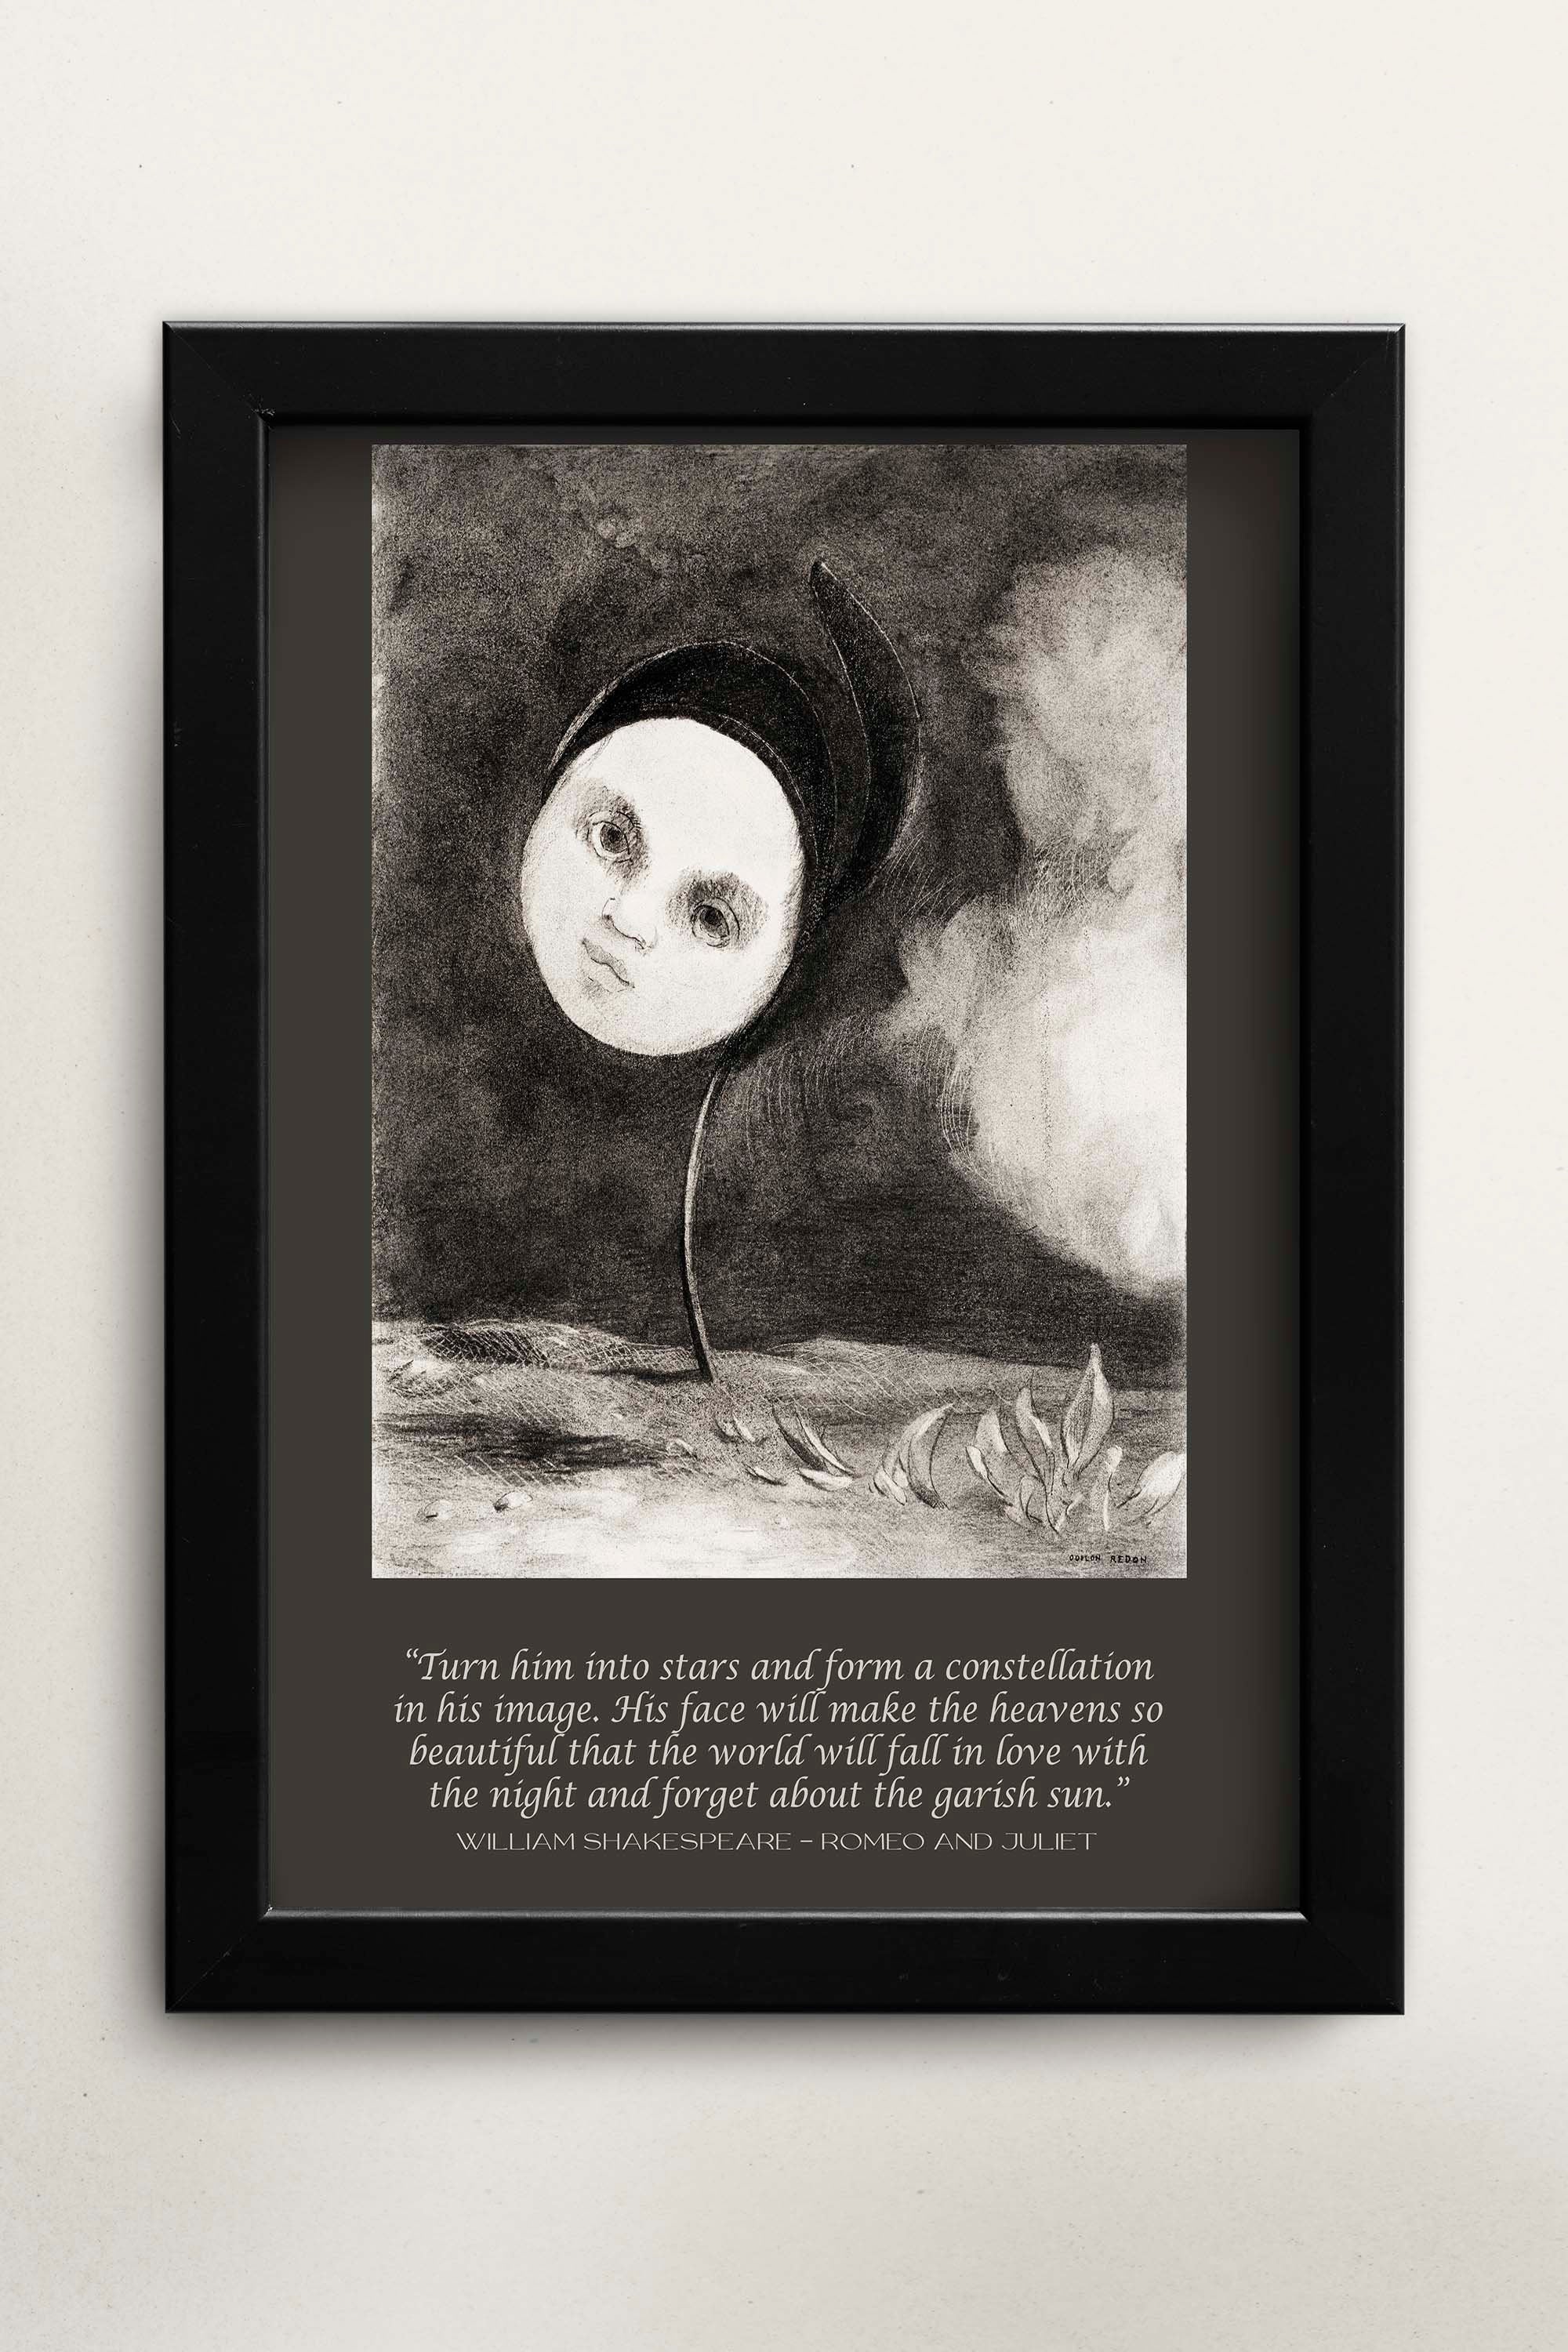 William Shakespeare Quote, Unframed Odilon Redon Fine Art Prints - Strange Flower, Turn him into stars and form a constellation